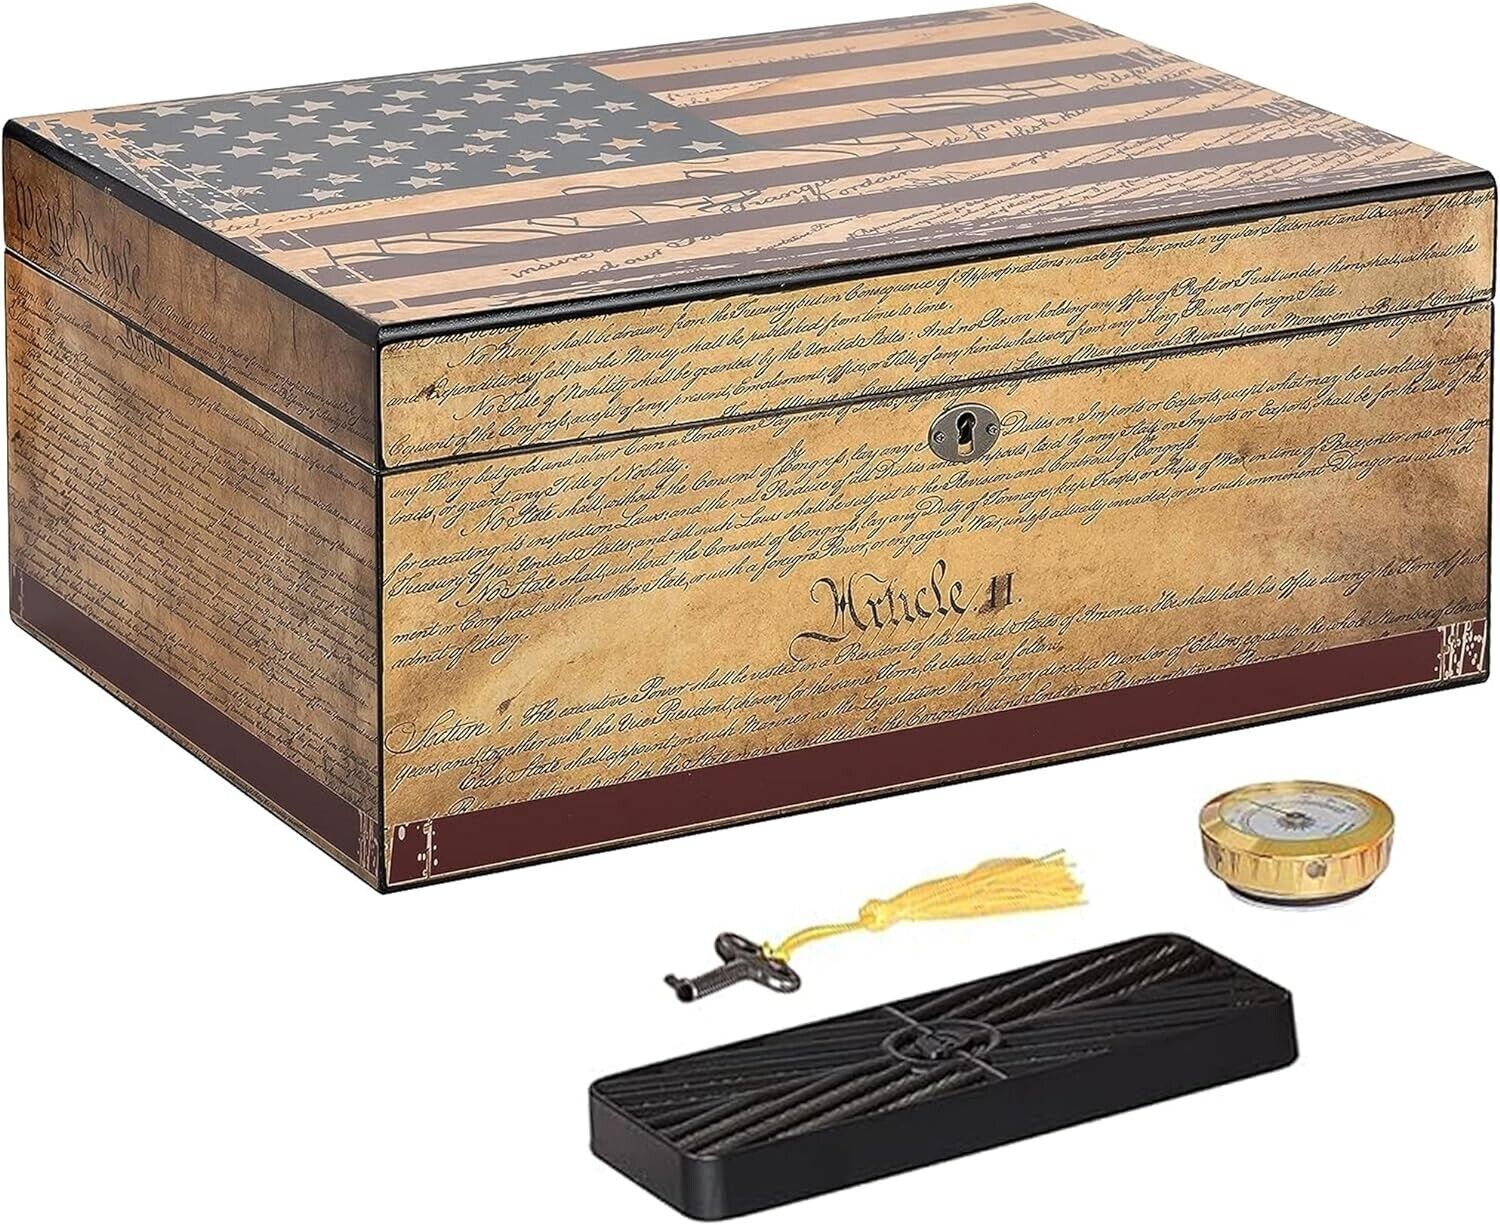 Humidor Supreme Constitution, Cigar Humidor Honoring The Supreme Law, 100 cigar